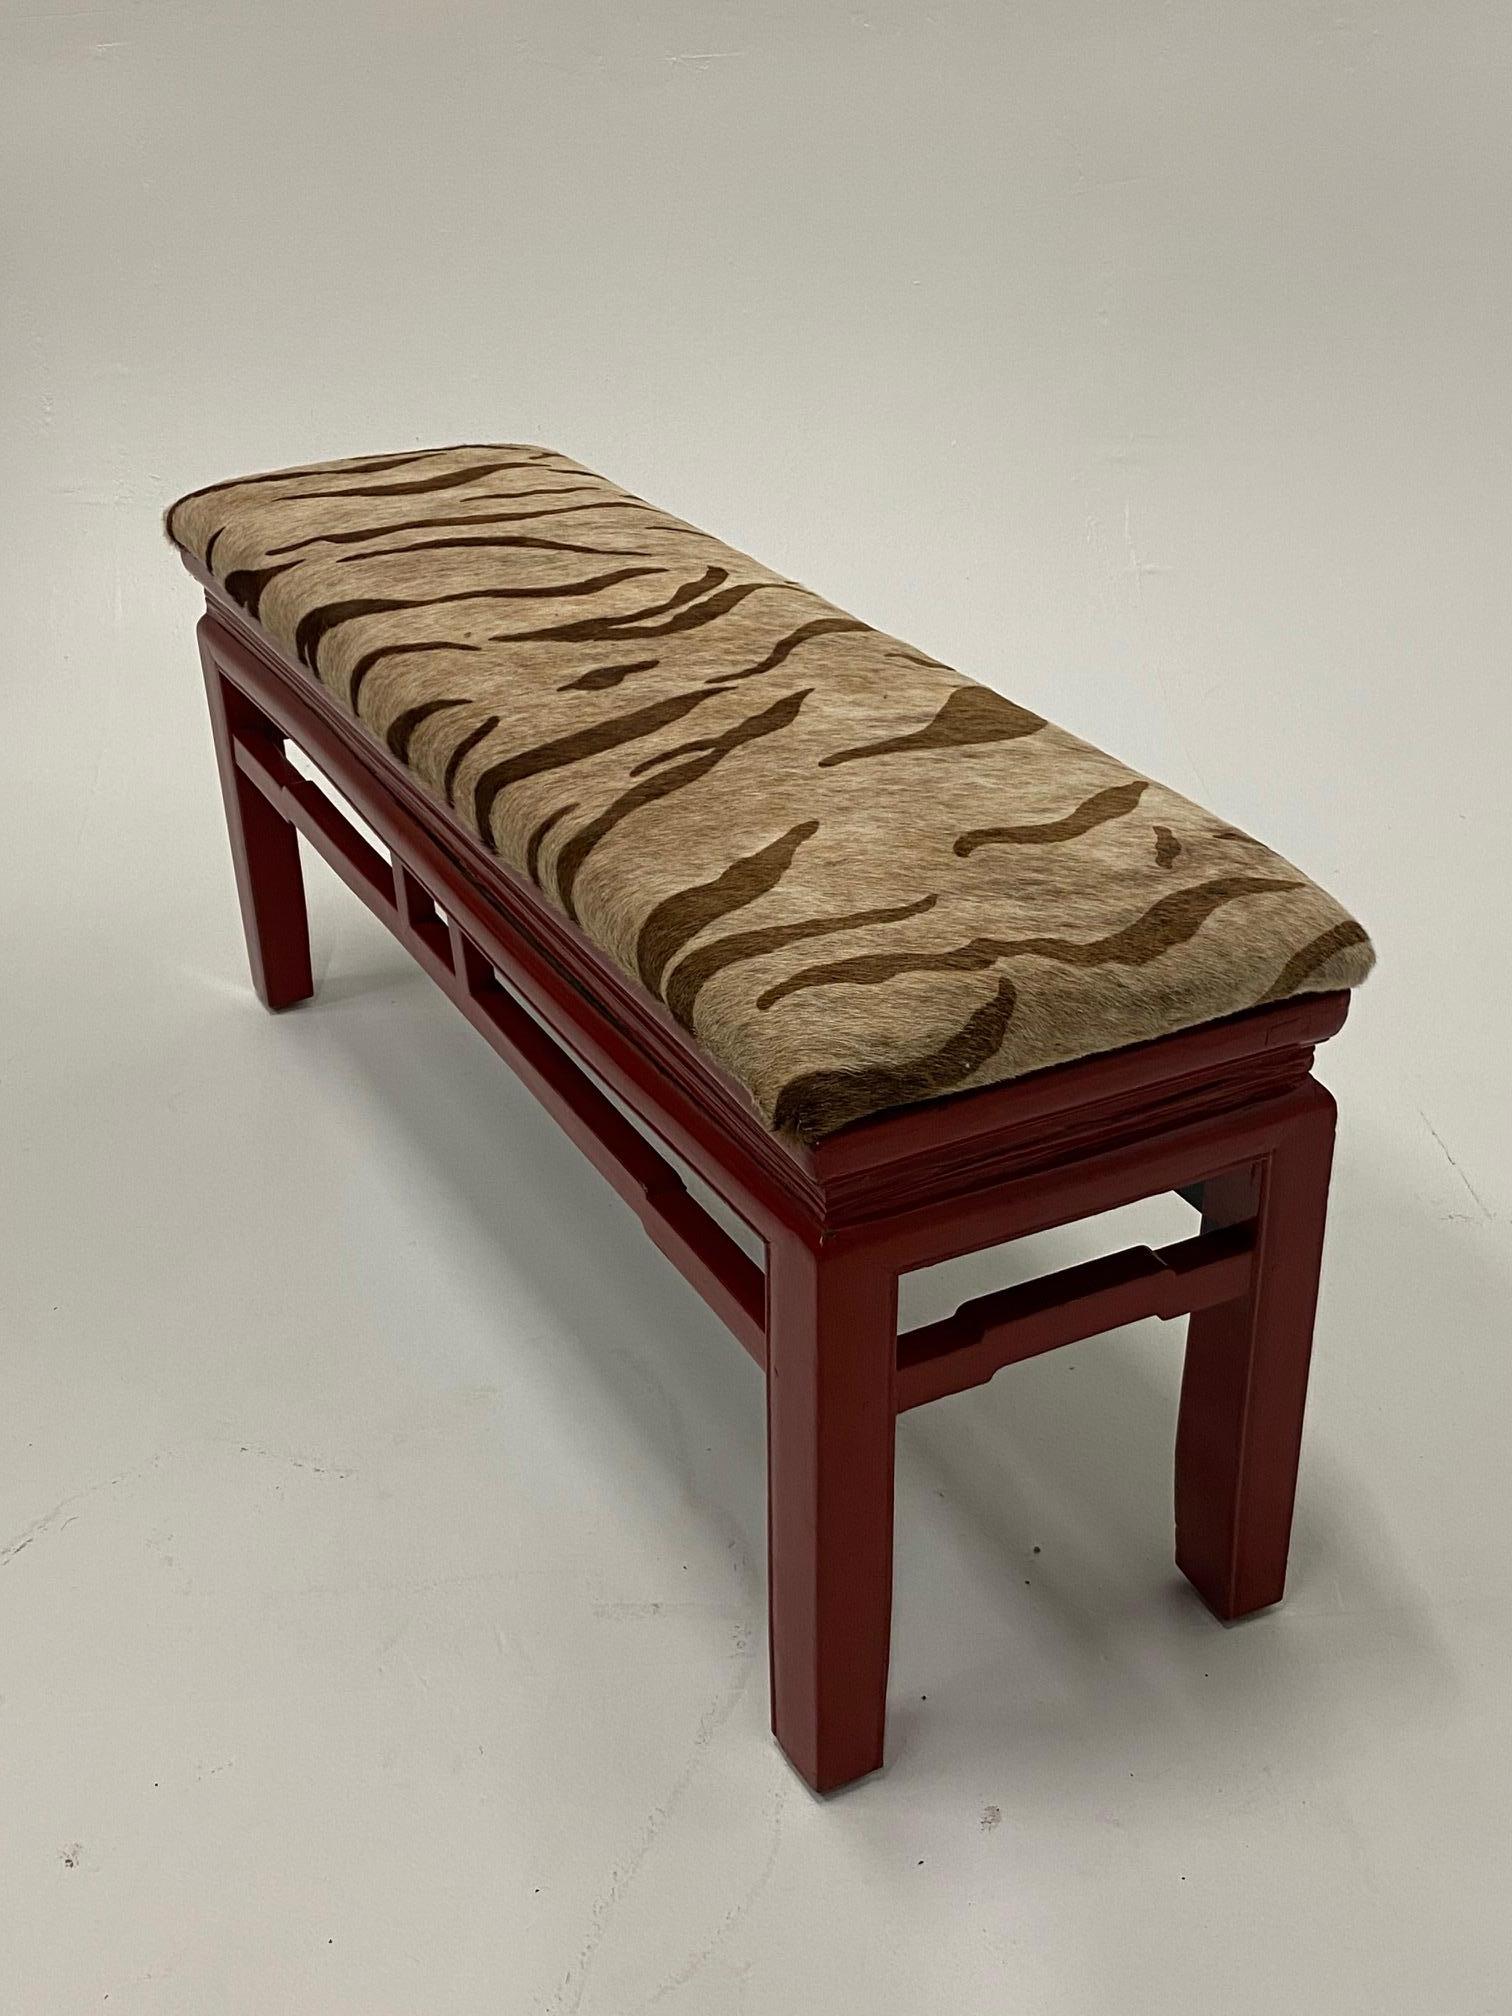 Stunning Asian Cinnabar Red Lacquer Bench Upholstered in Printed Cowhide For Sale 1